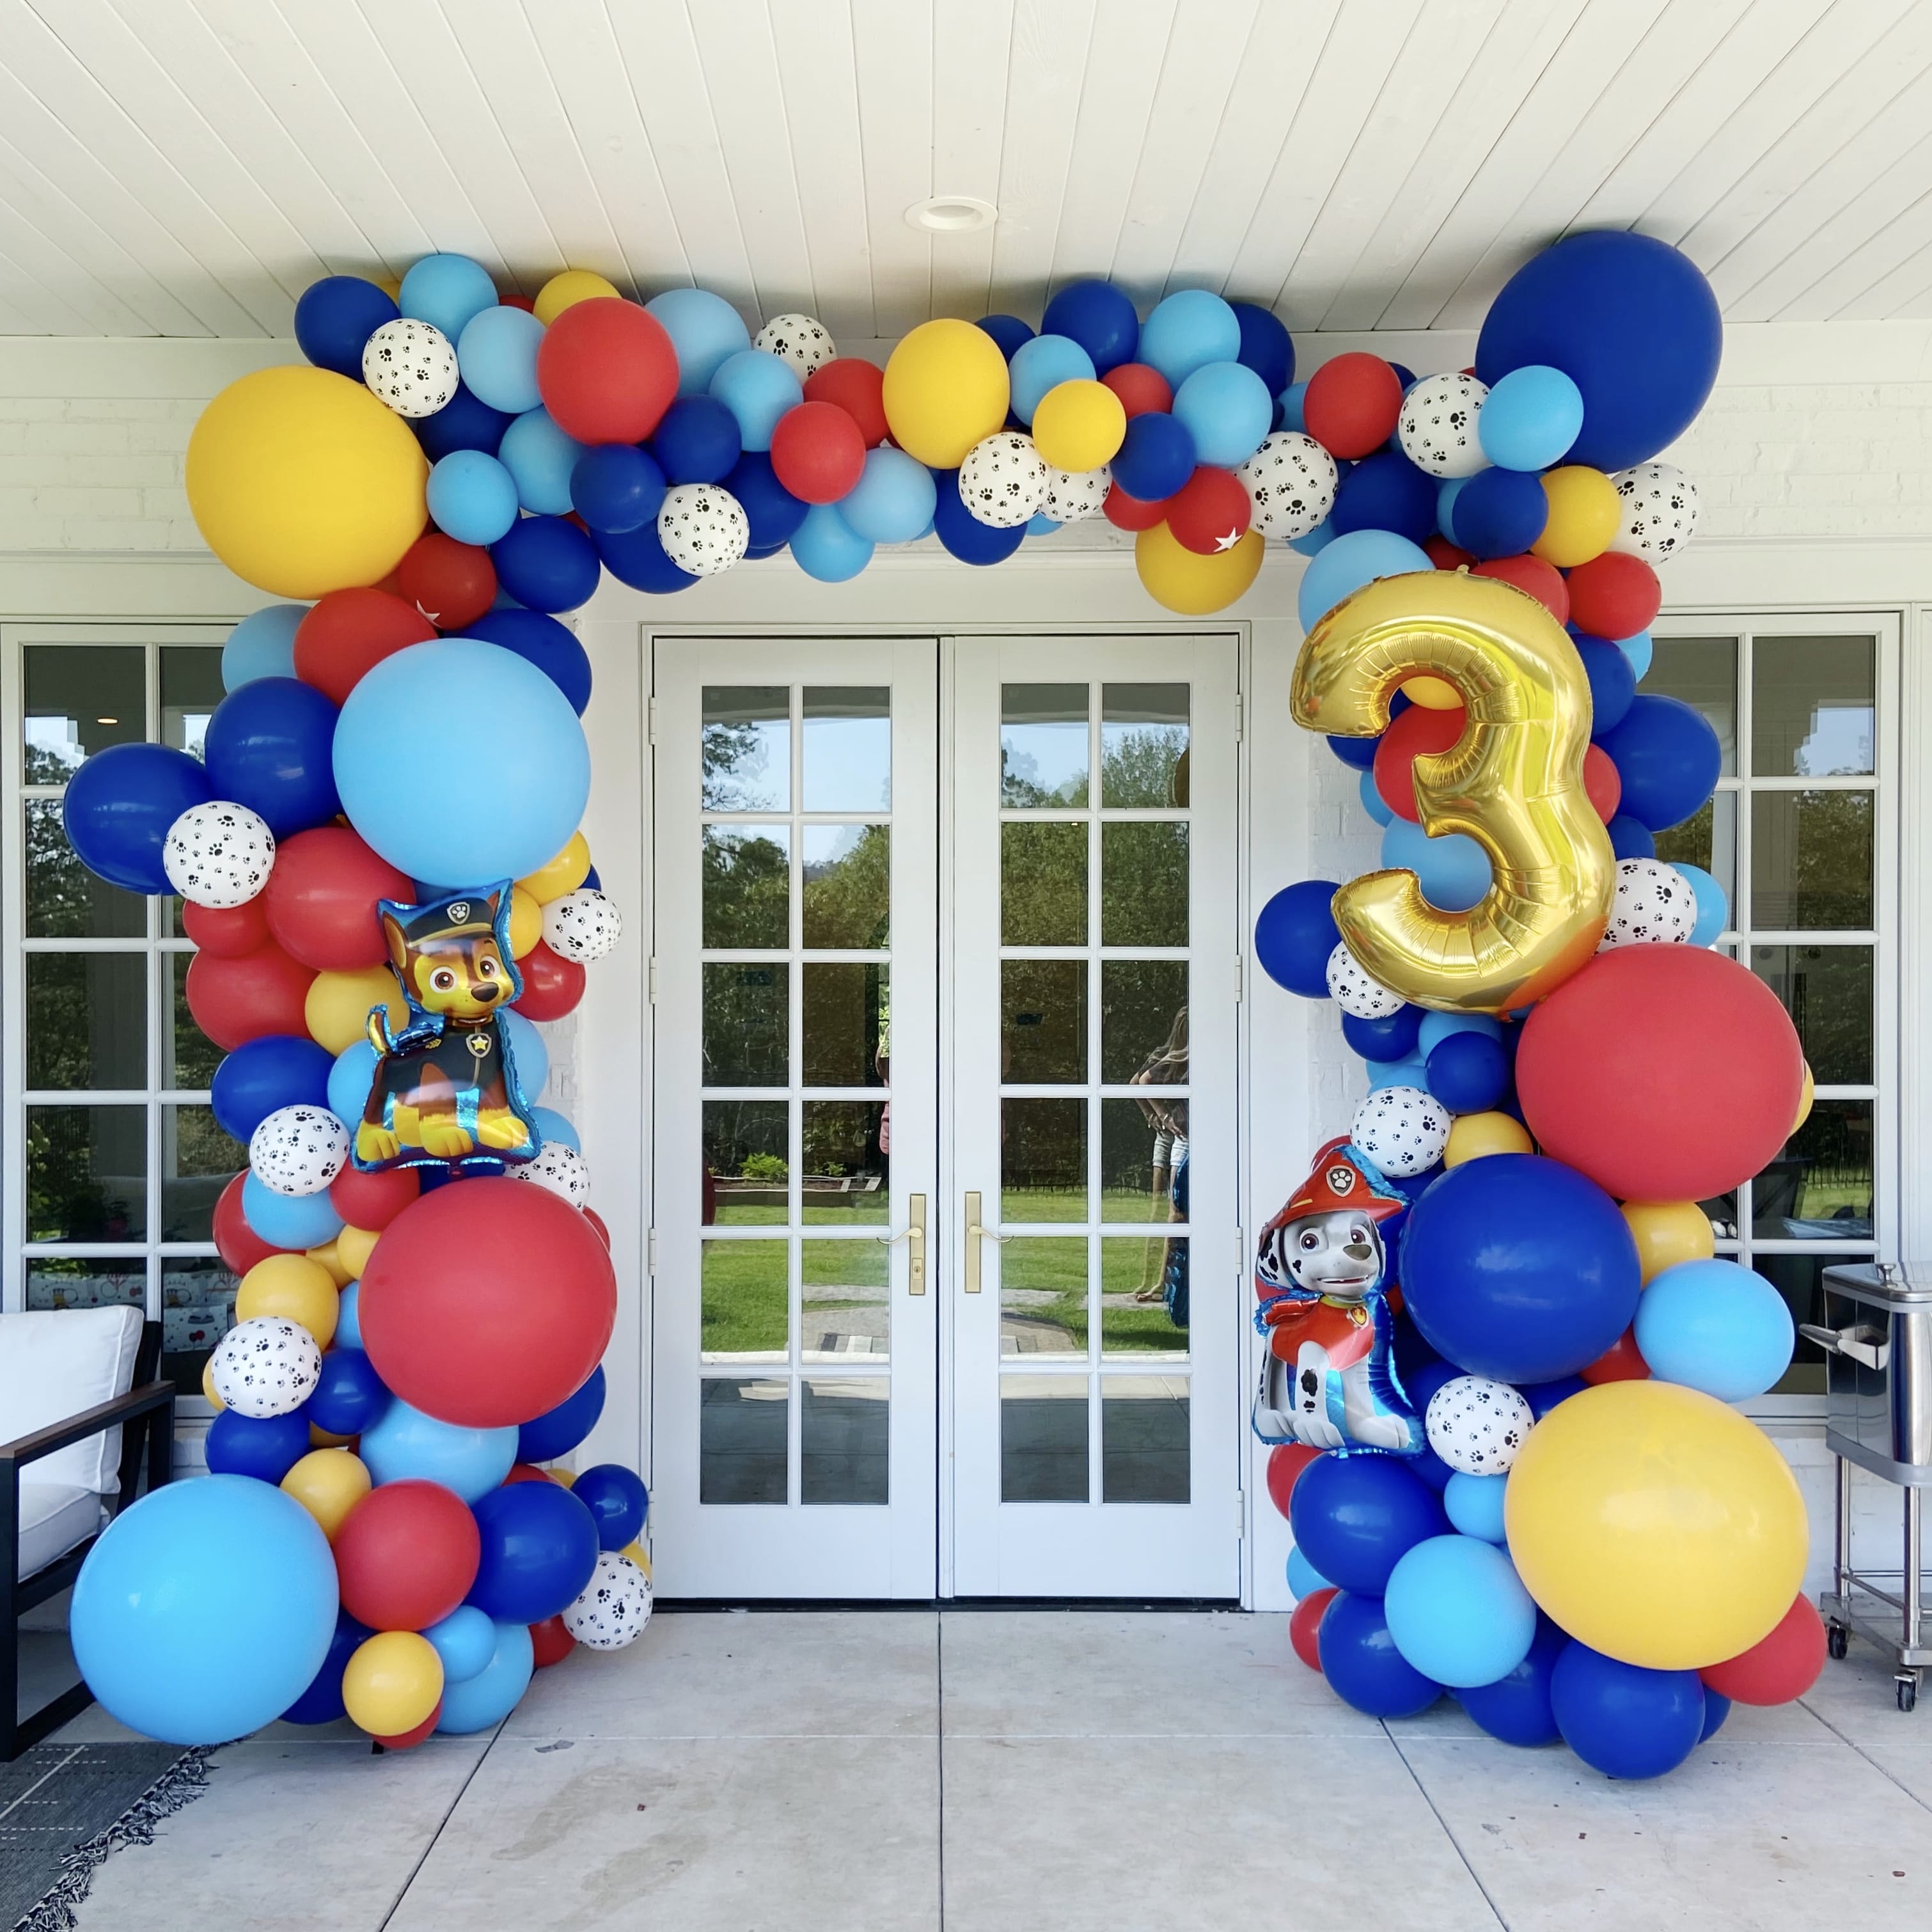 Entryway full balloon arch wrap in Paw Patrol theme by Just Peachy in Little Rock, Arkansas.